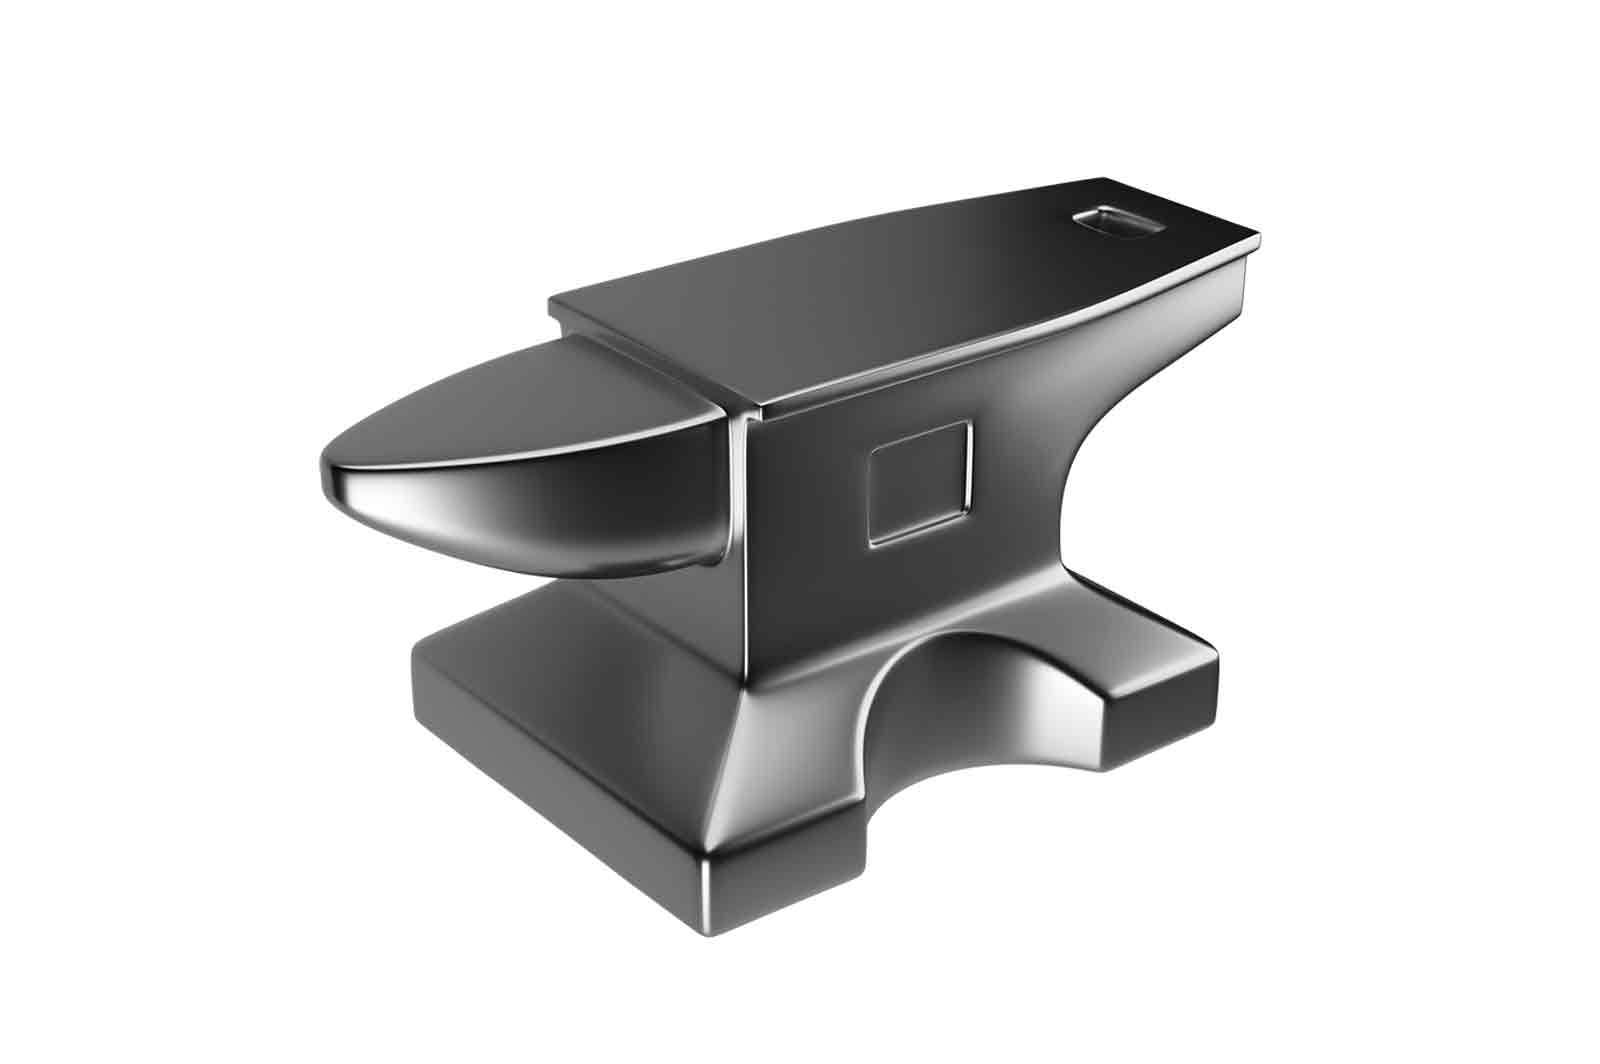 Metallic anvil on white background, 3d rendered illustration. A heavy iron block with a flat top and a curved base, used for shaping metal by hammering.